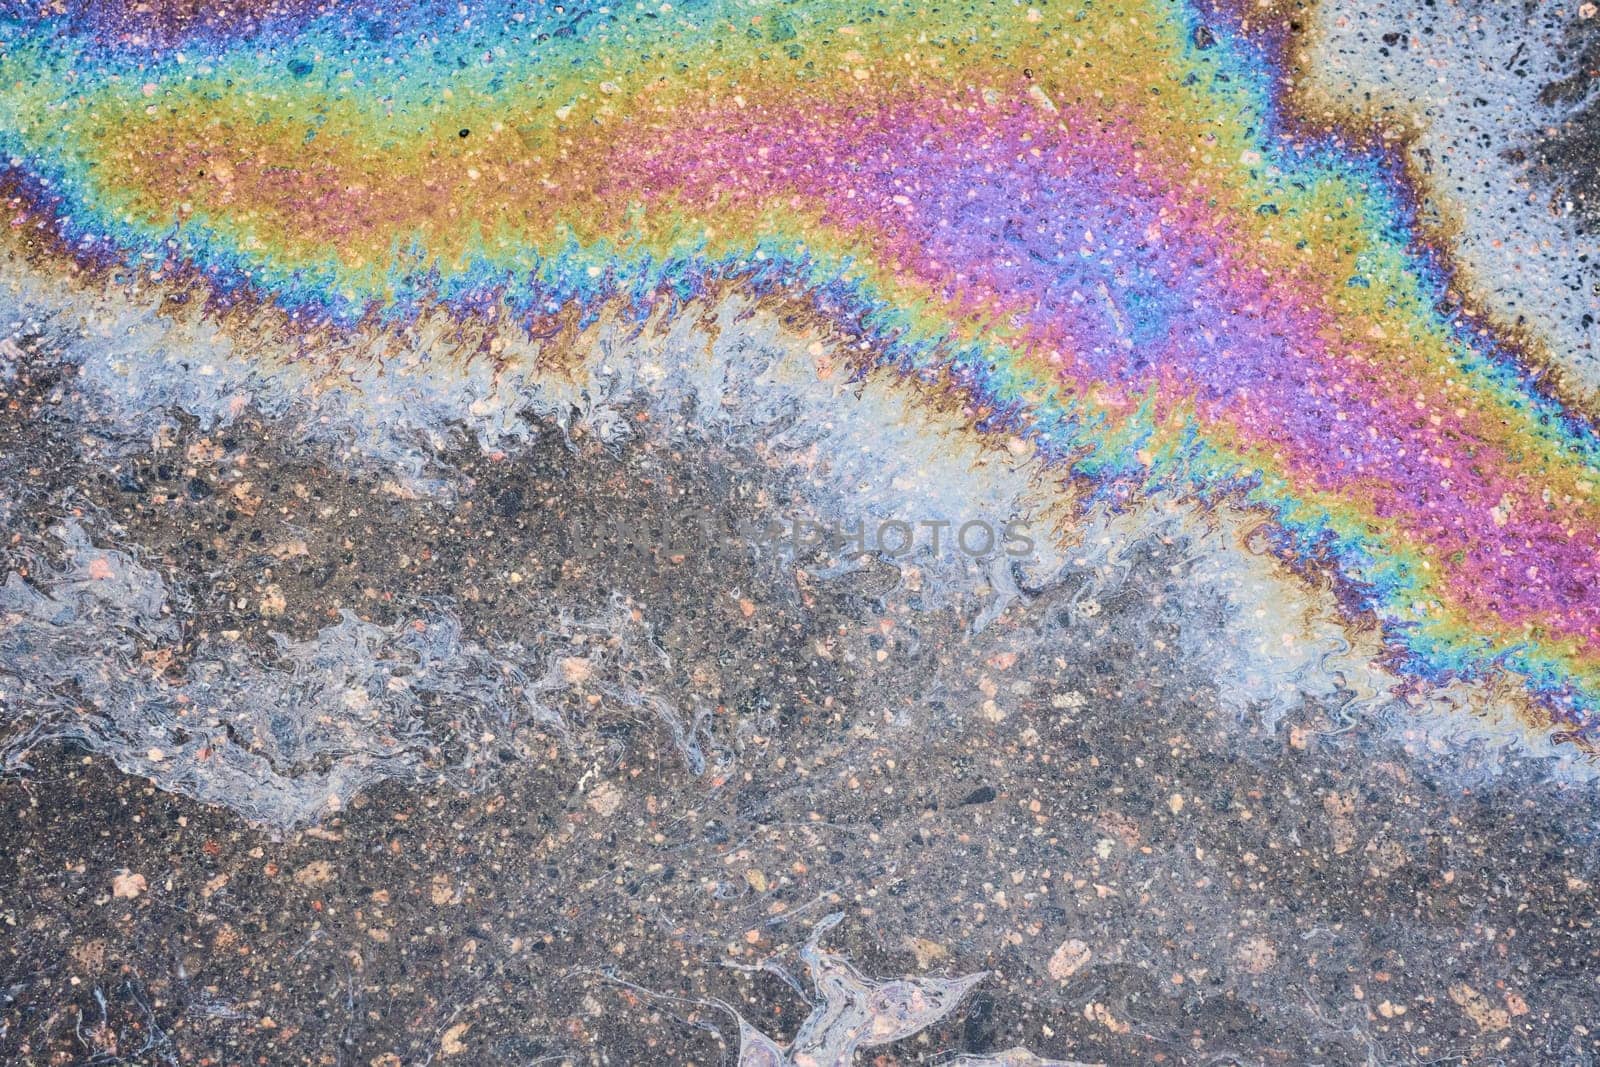 Close-up of an iridescent oil or gasoline spill on a wet asphalt, viewed from above. Bold multicolored spots on the asphalt.